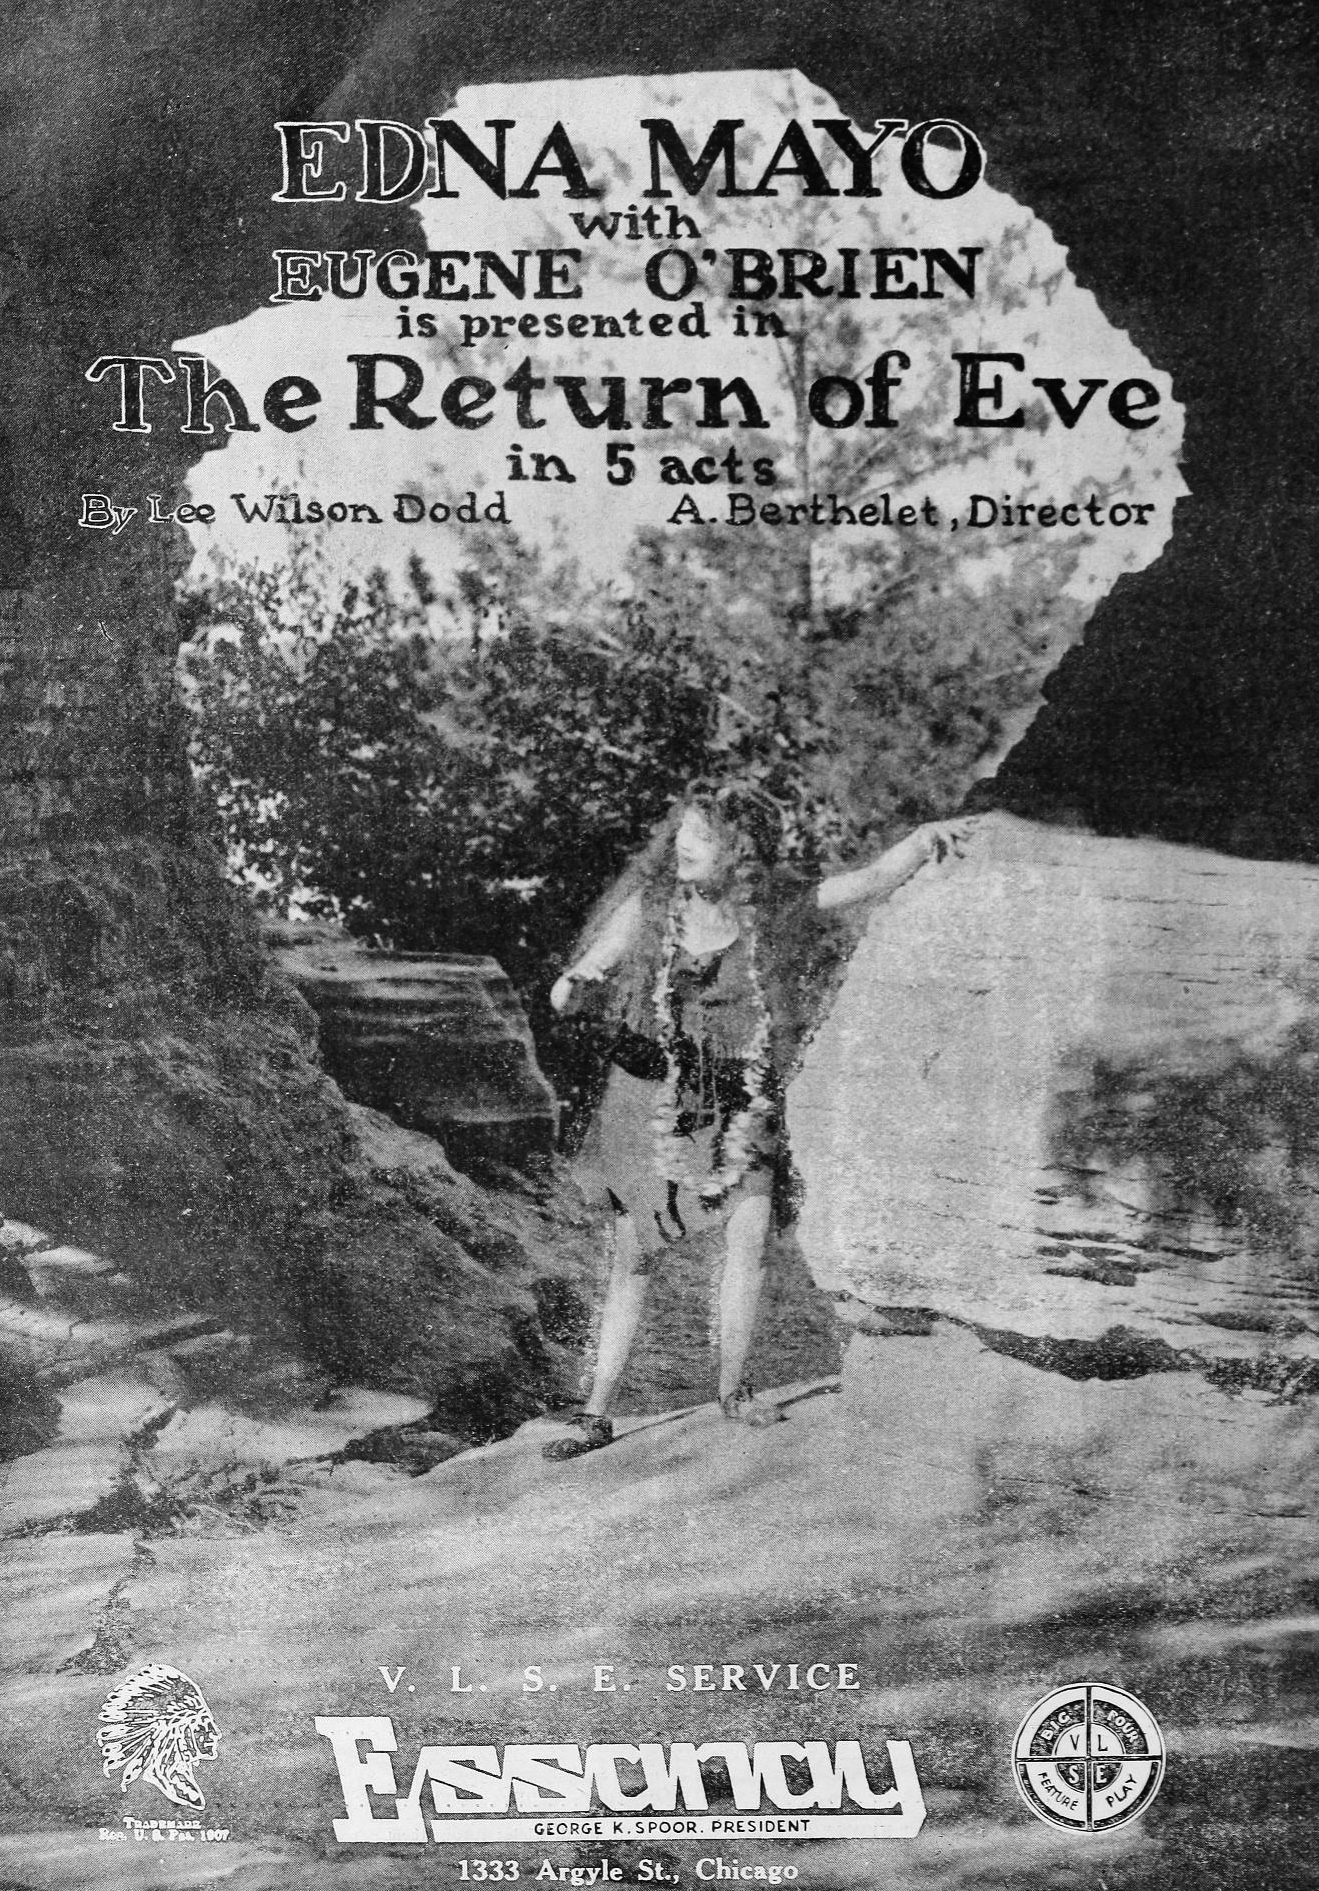 The Return of Eve